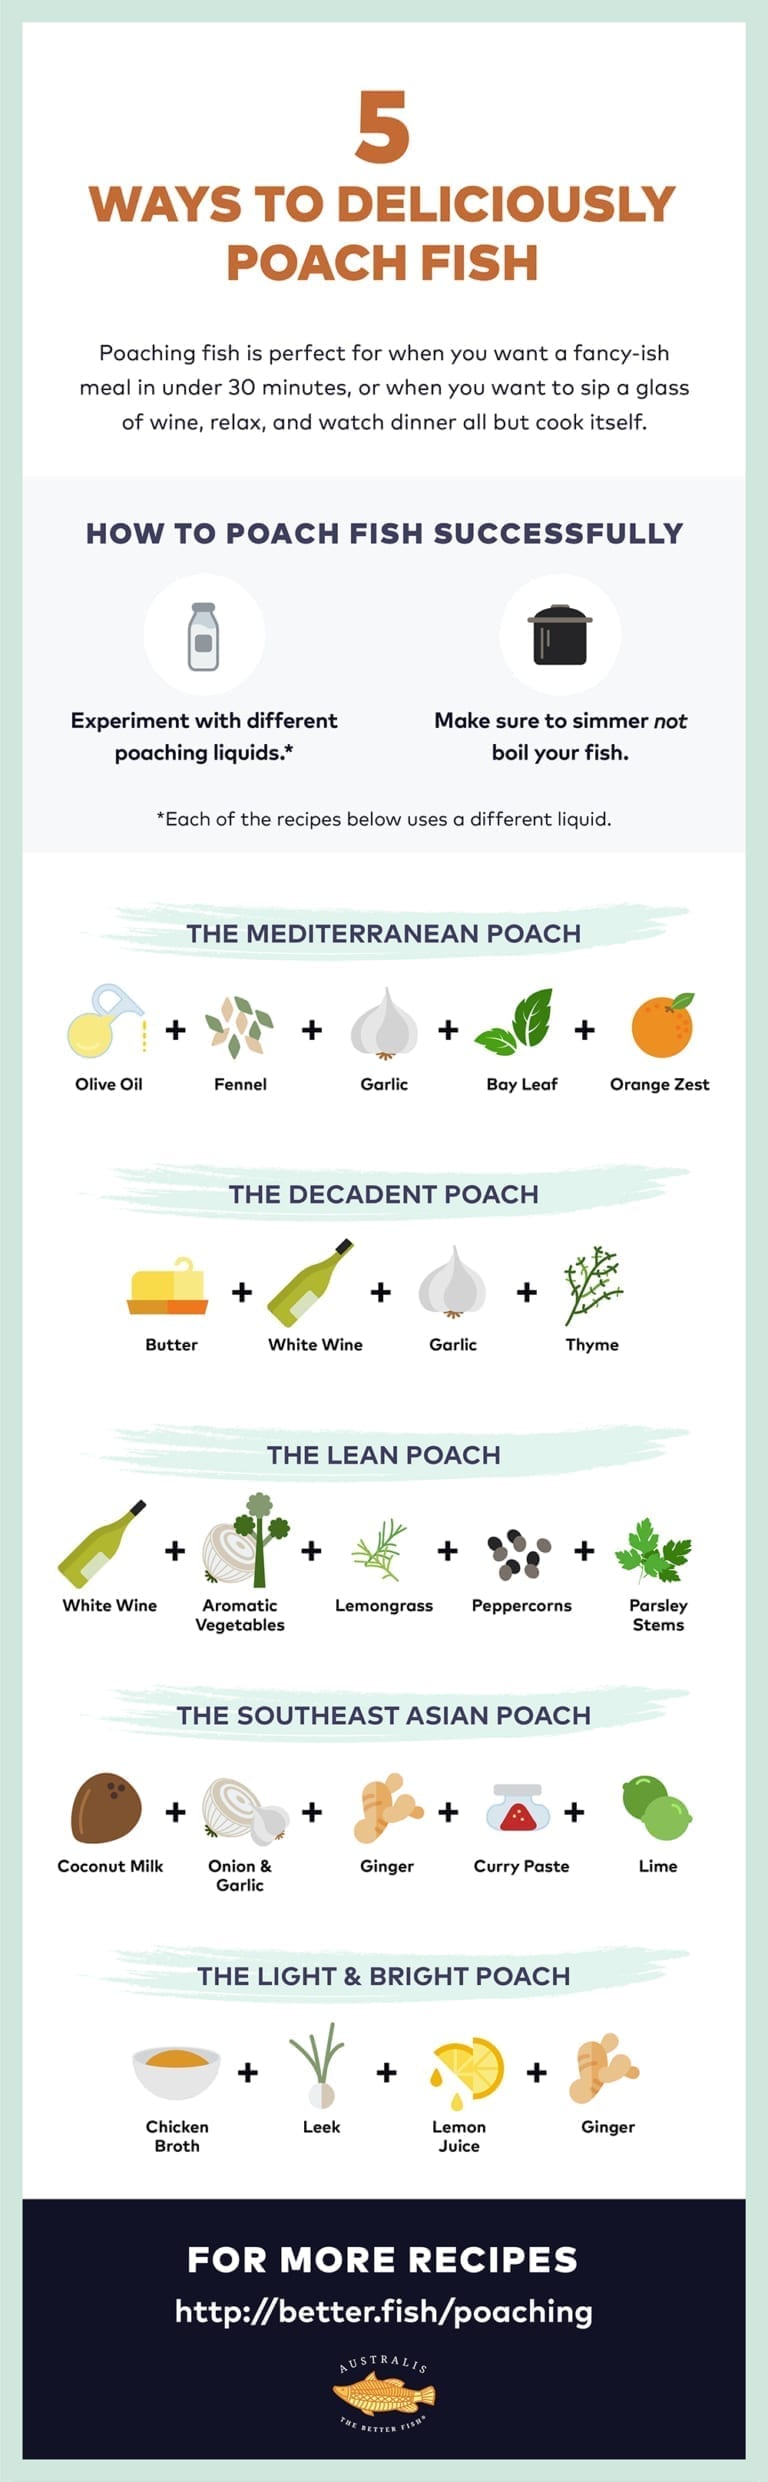 An infographic on the details of how to poach fish.